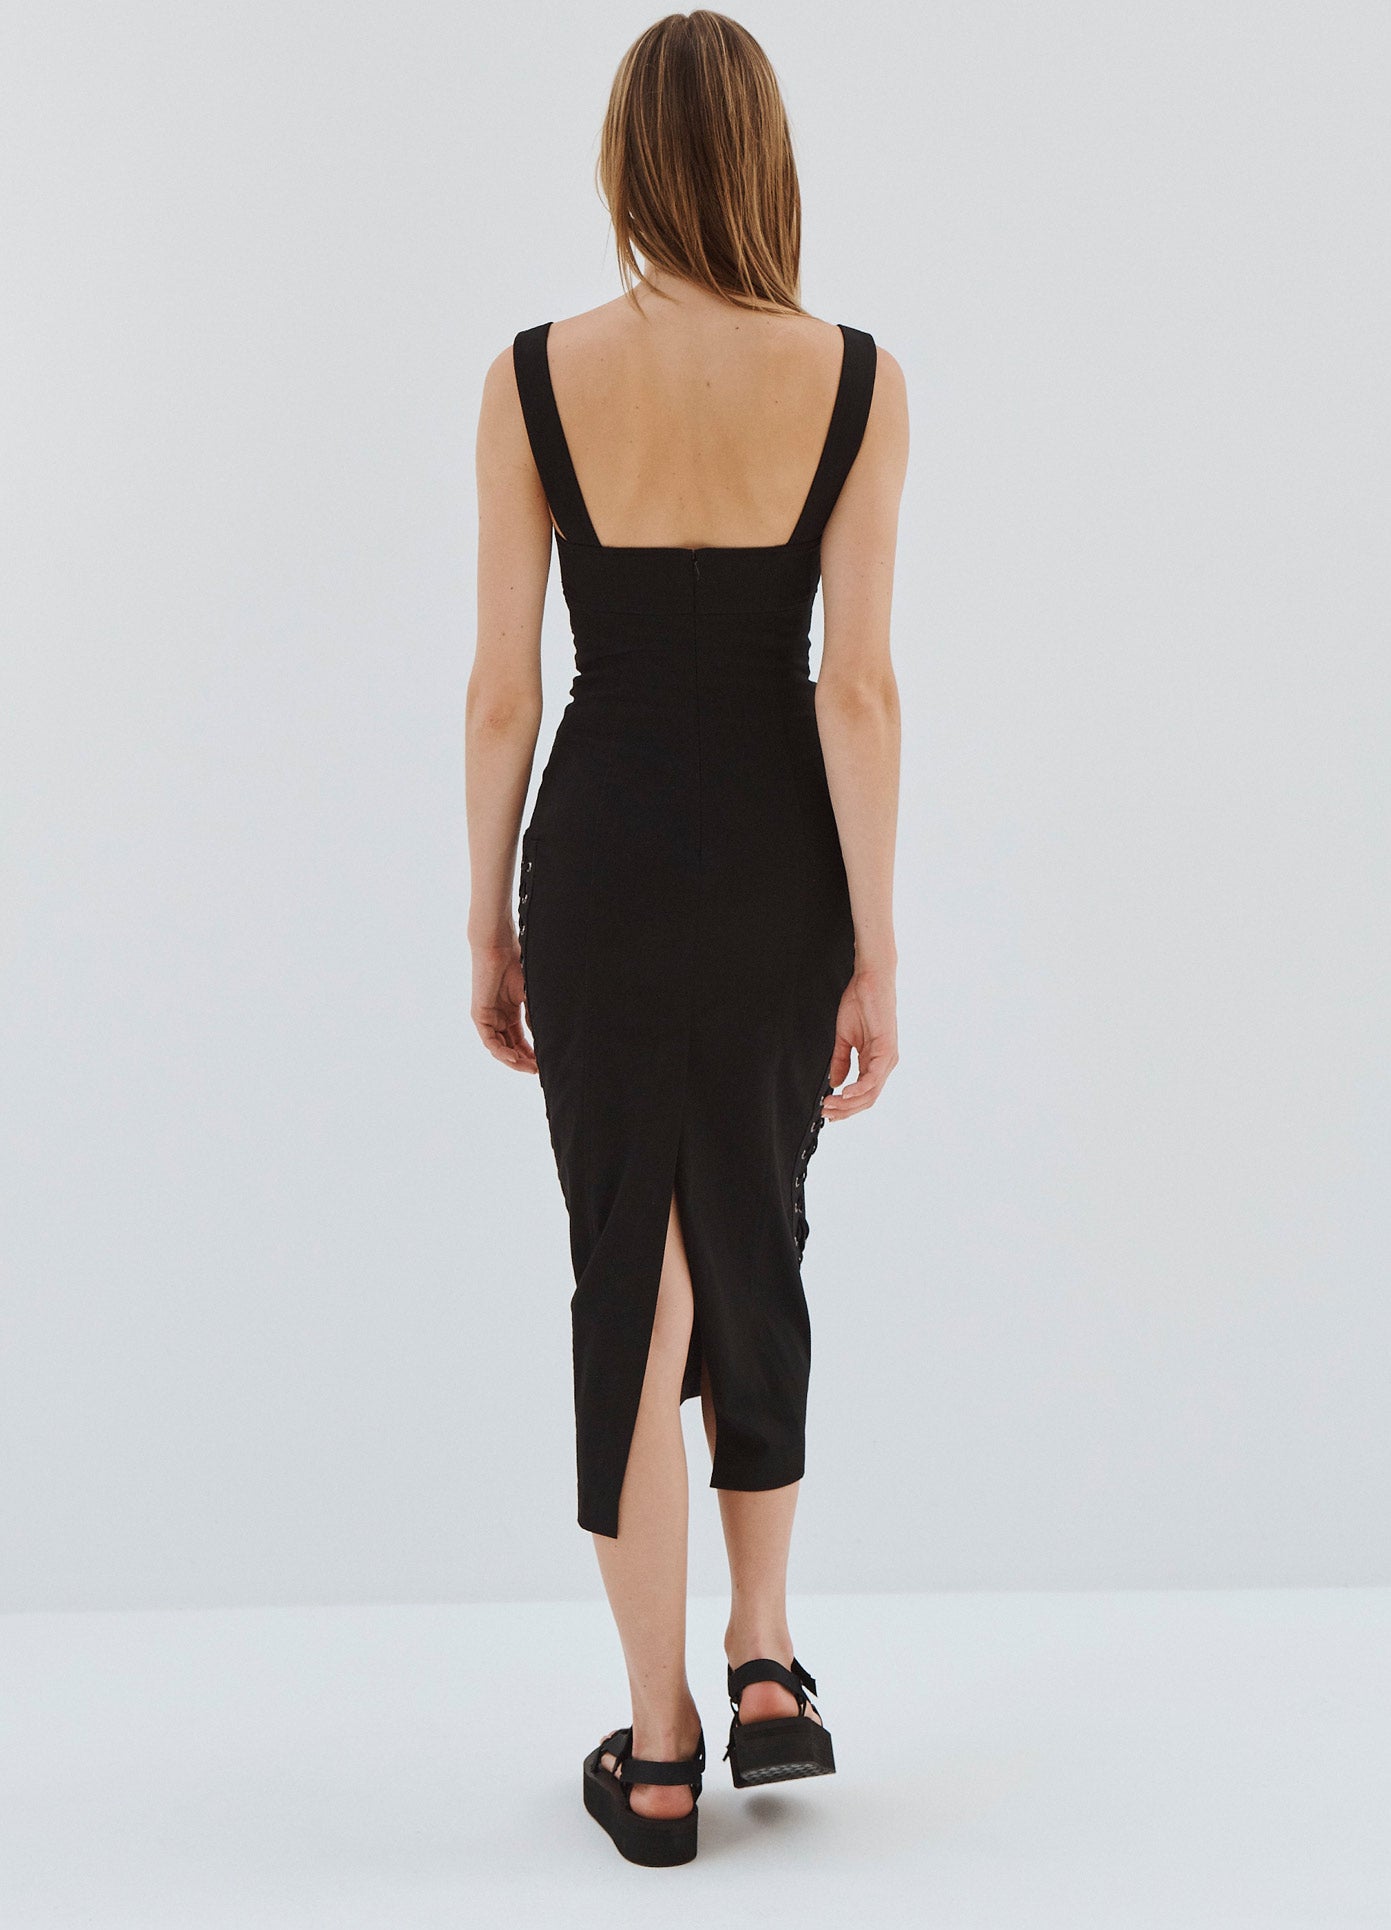 MONSE Laced Detail Dress in Black on Model Back View